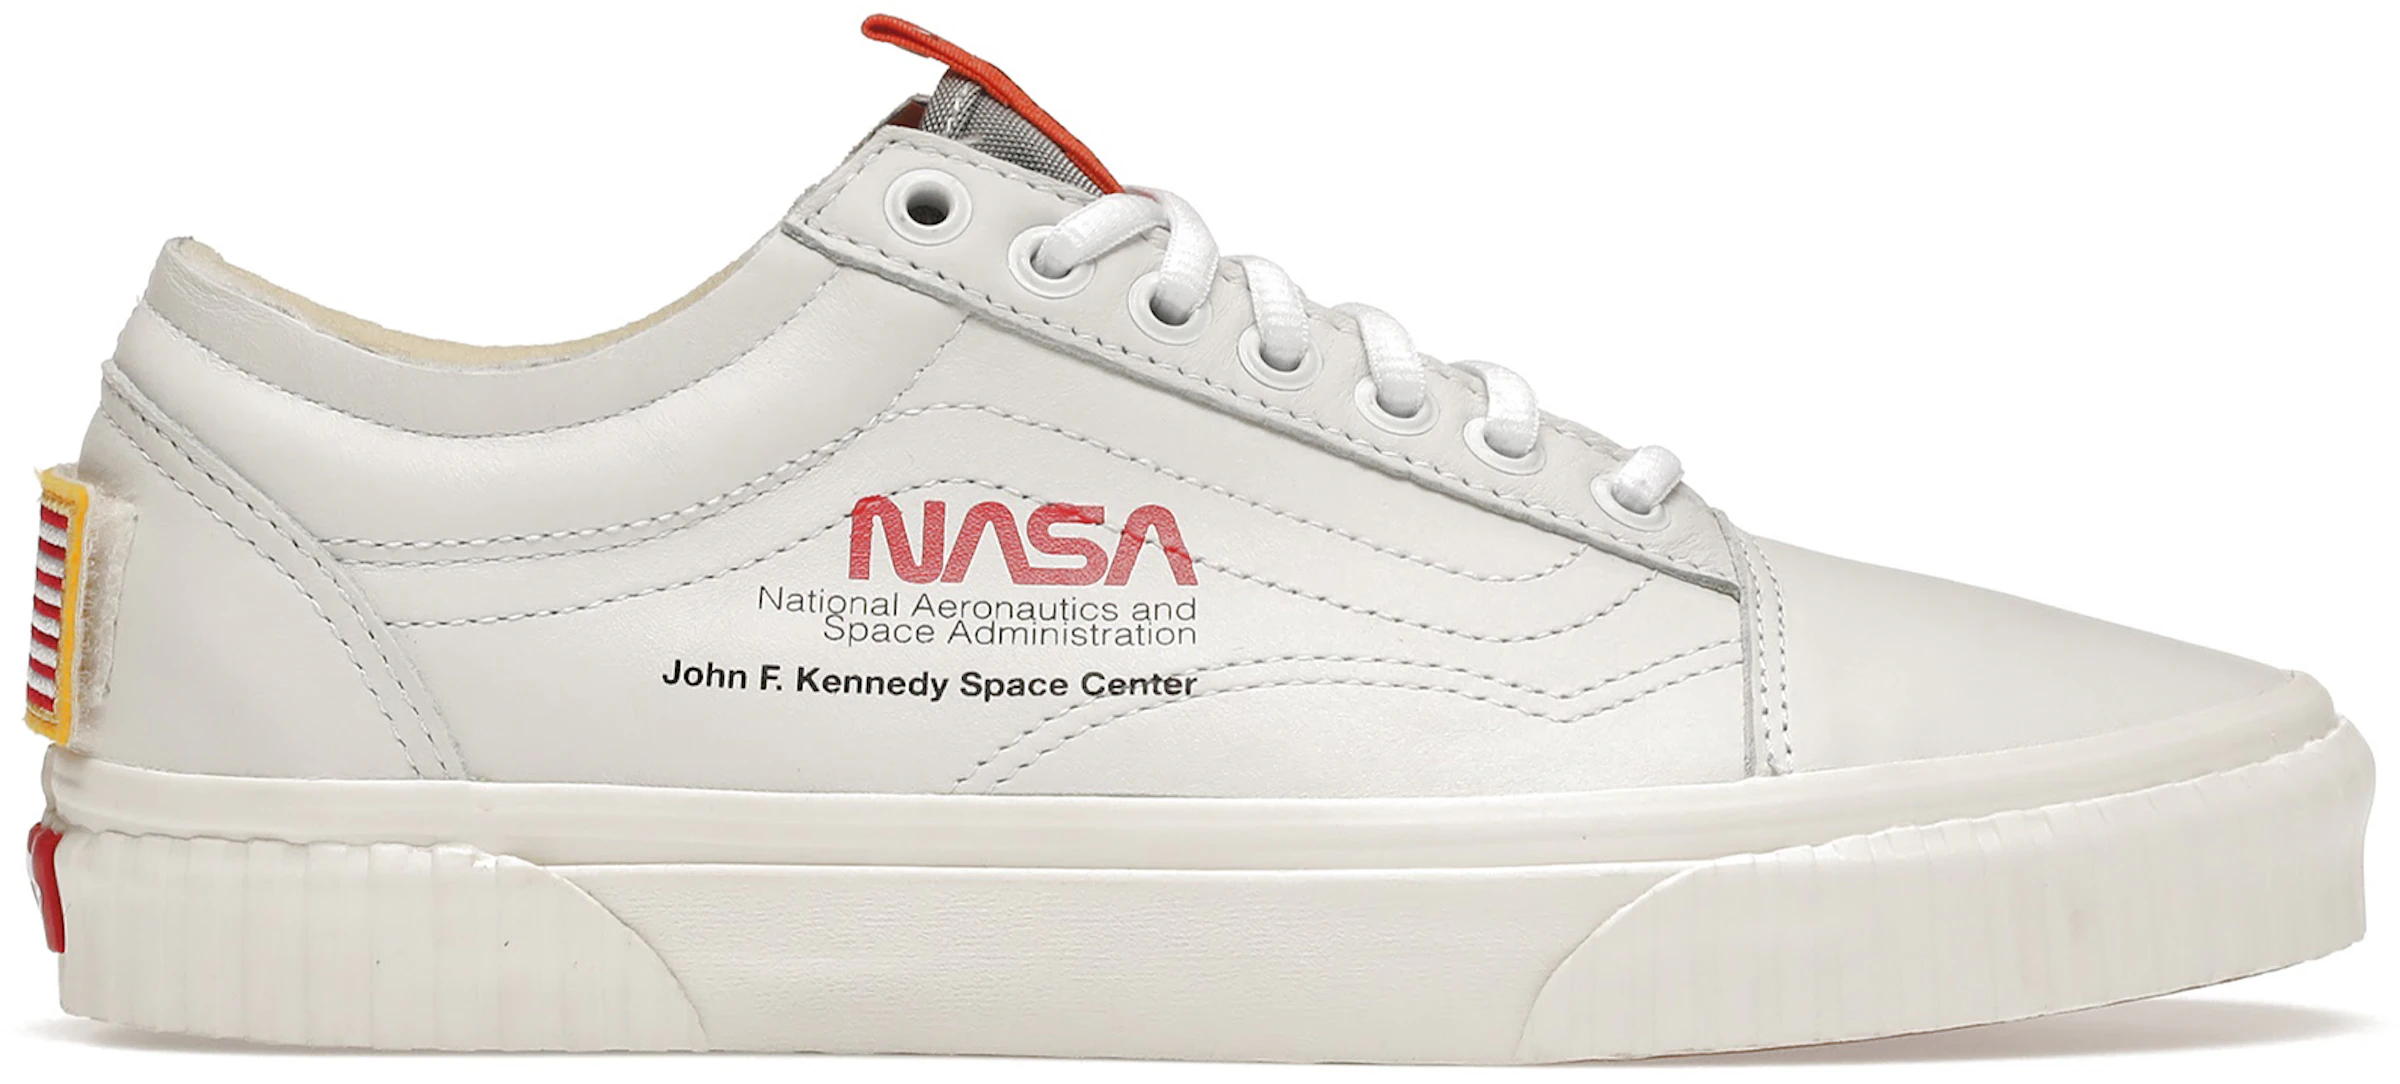 Vans Skool NASA Space Voyager True White - VN0A38G1UP9/VN0A38G1UP91 US